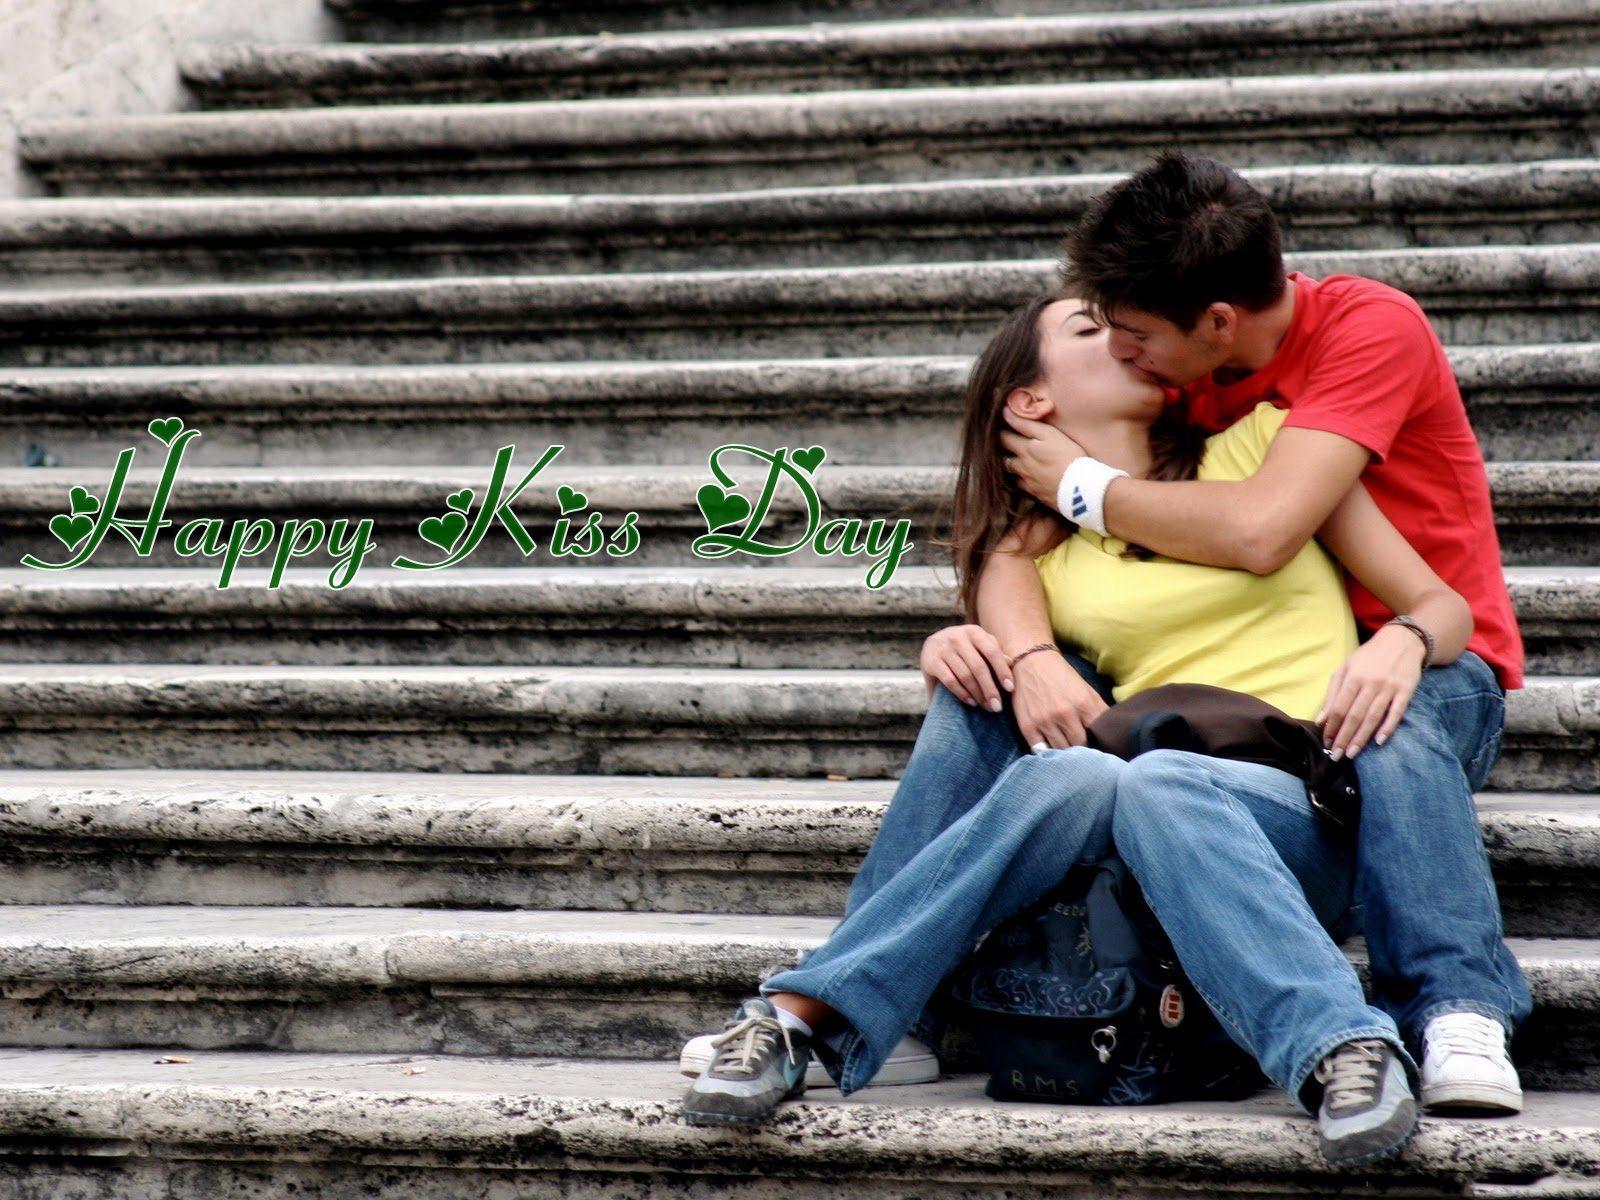 Happy Kiss Day 2019 Quotes Wishes Messages Sms Funny Memes